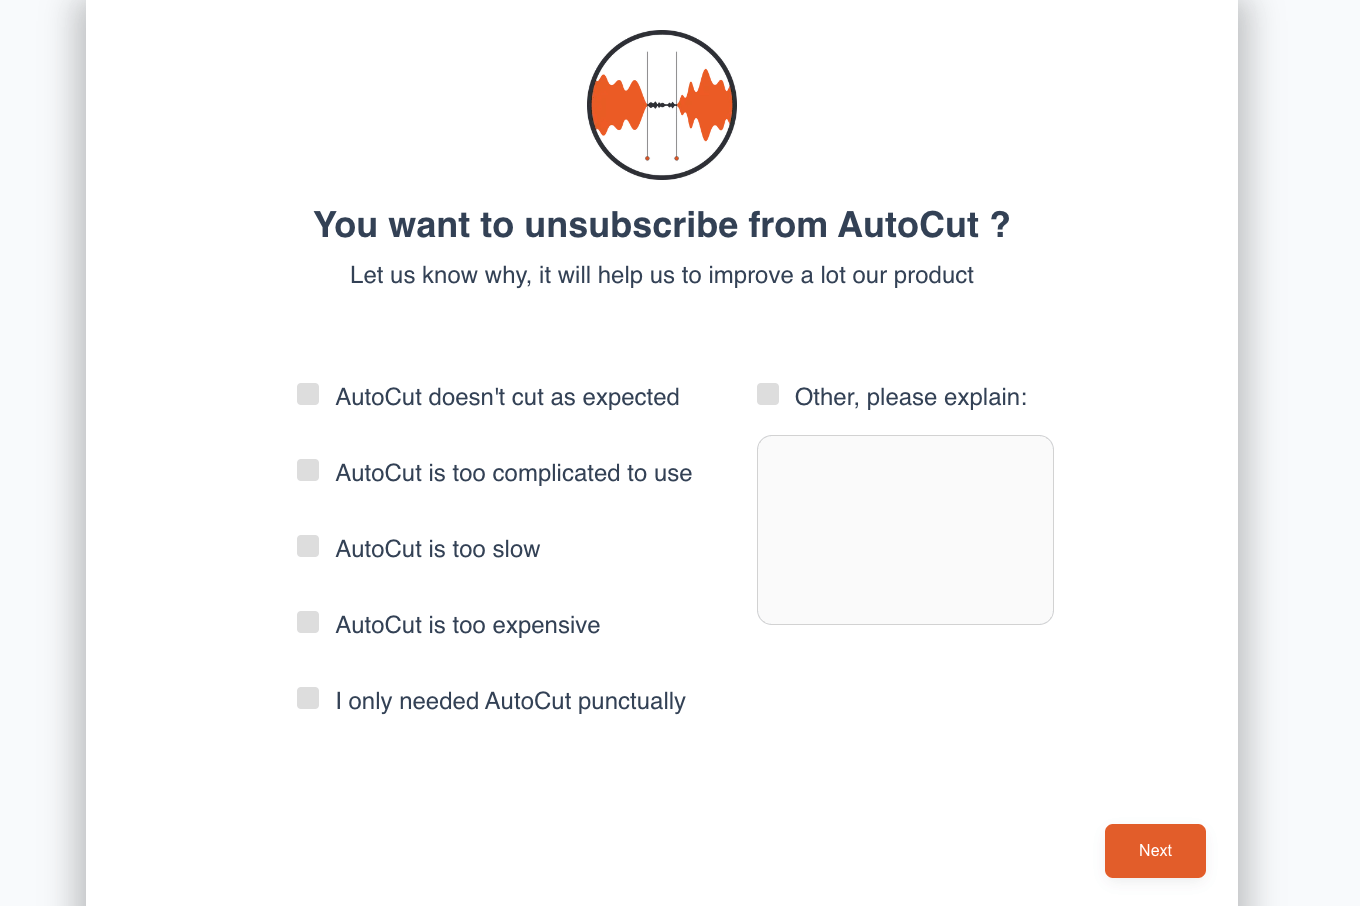 Tell us why you want to unsubscribe